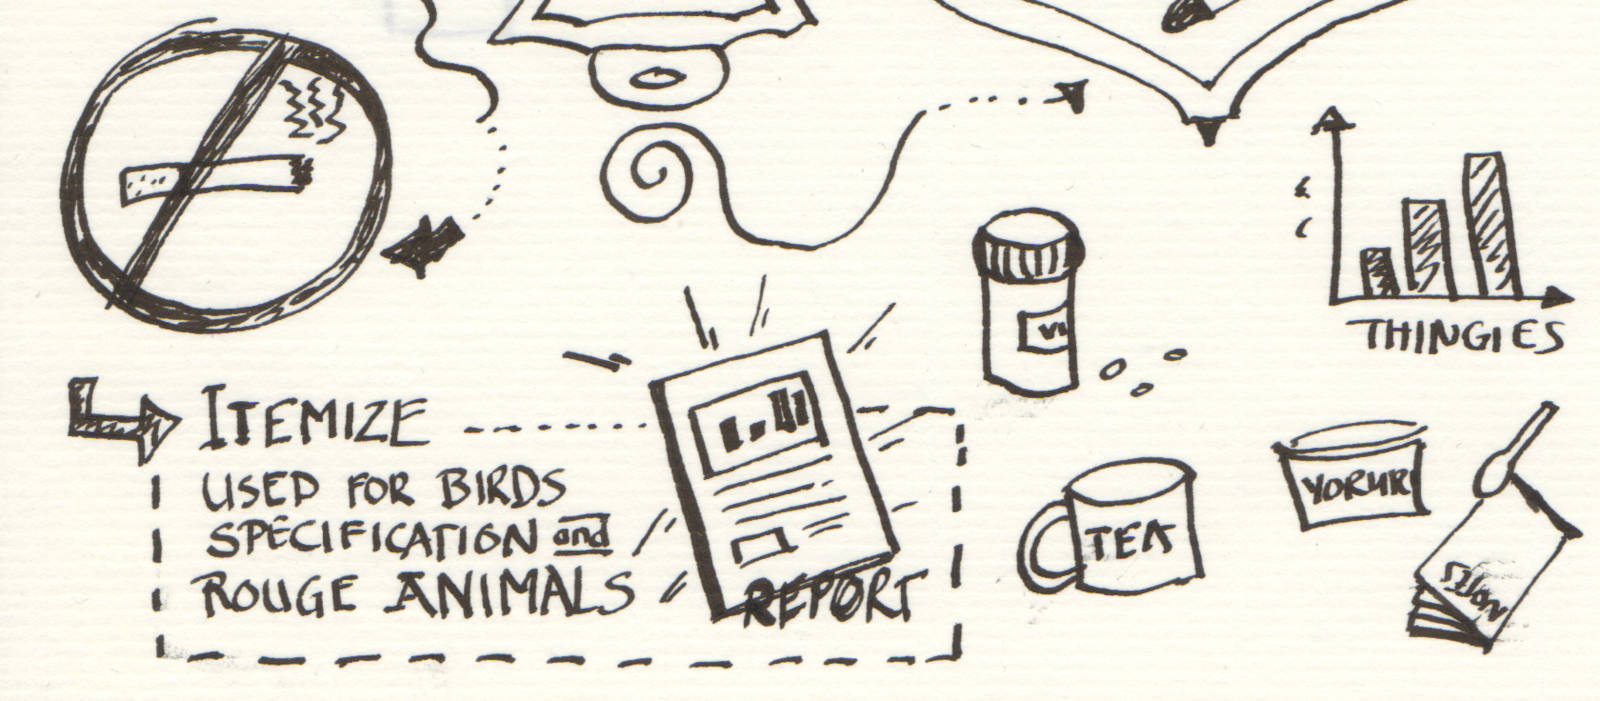 Ink drawing of items a person might have on a chaotic desk. A no smoking sign, a mug of tea, a yorur (not yogurt) jar, a notebook with a spoon on it, a bar chart labeled only THINGIES, a report that says Itemize-Used for bird specifications and rogue animals, a bottle of bills with some lying next to it. Own work 2023.